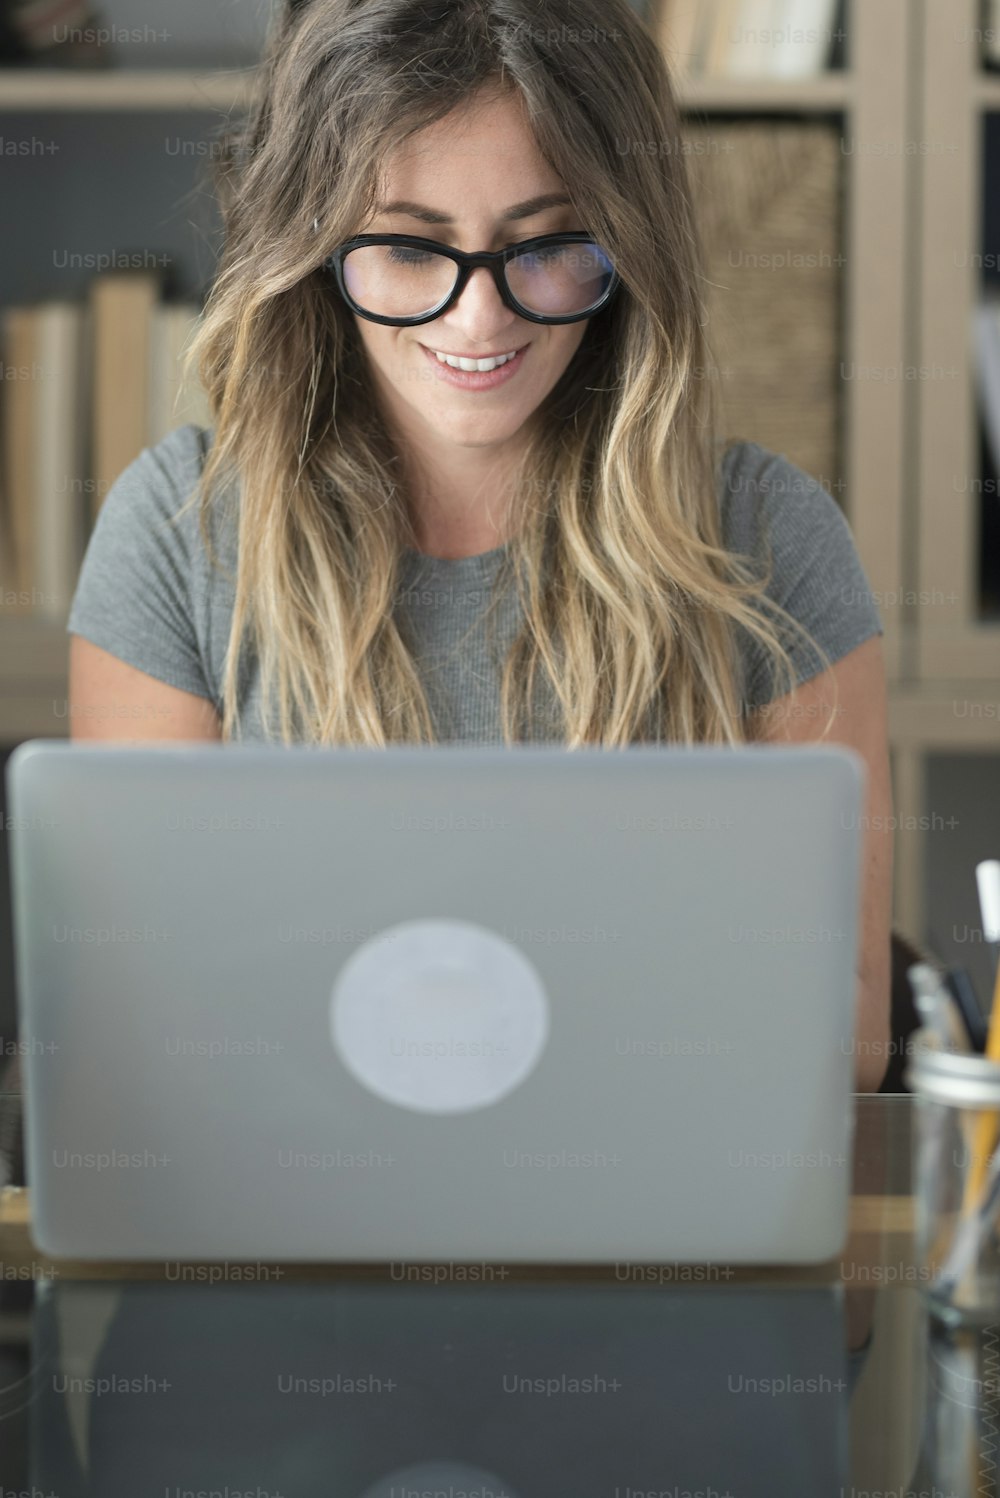 Pretty woman with glasses eyewear work at home on laptop computer - smart working female people at office desk looking the monitor - professional modern job freelance lifestyle concept